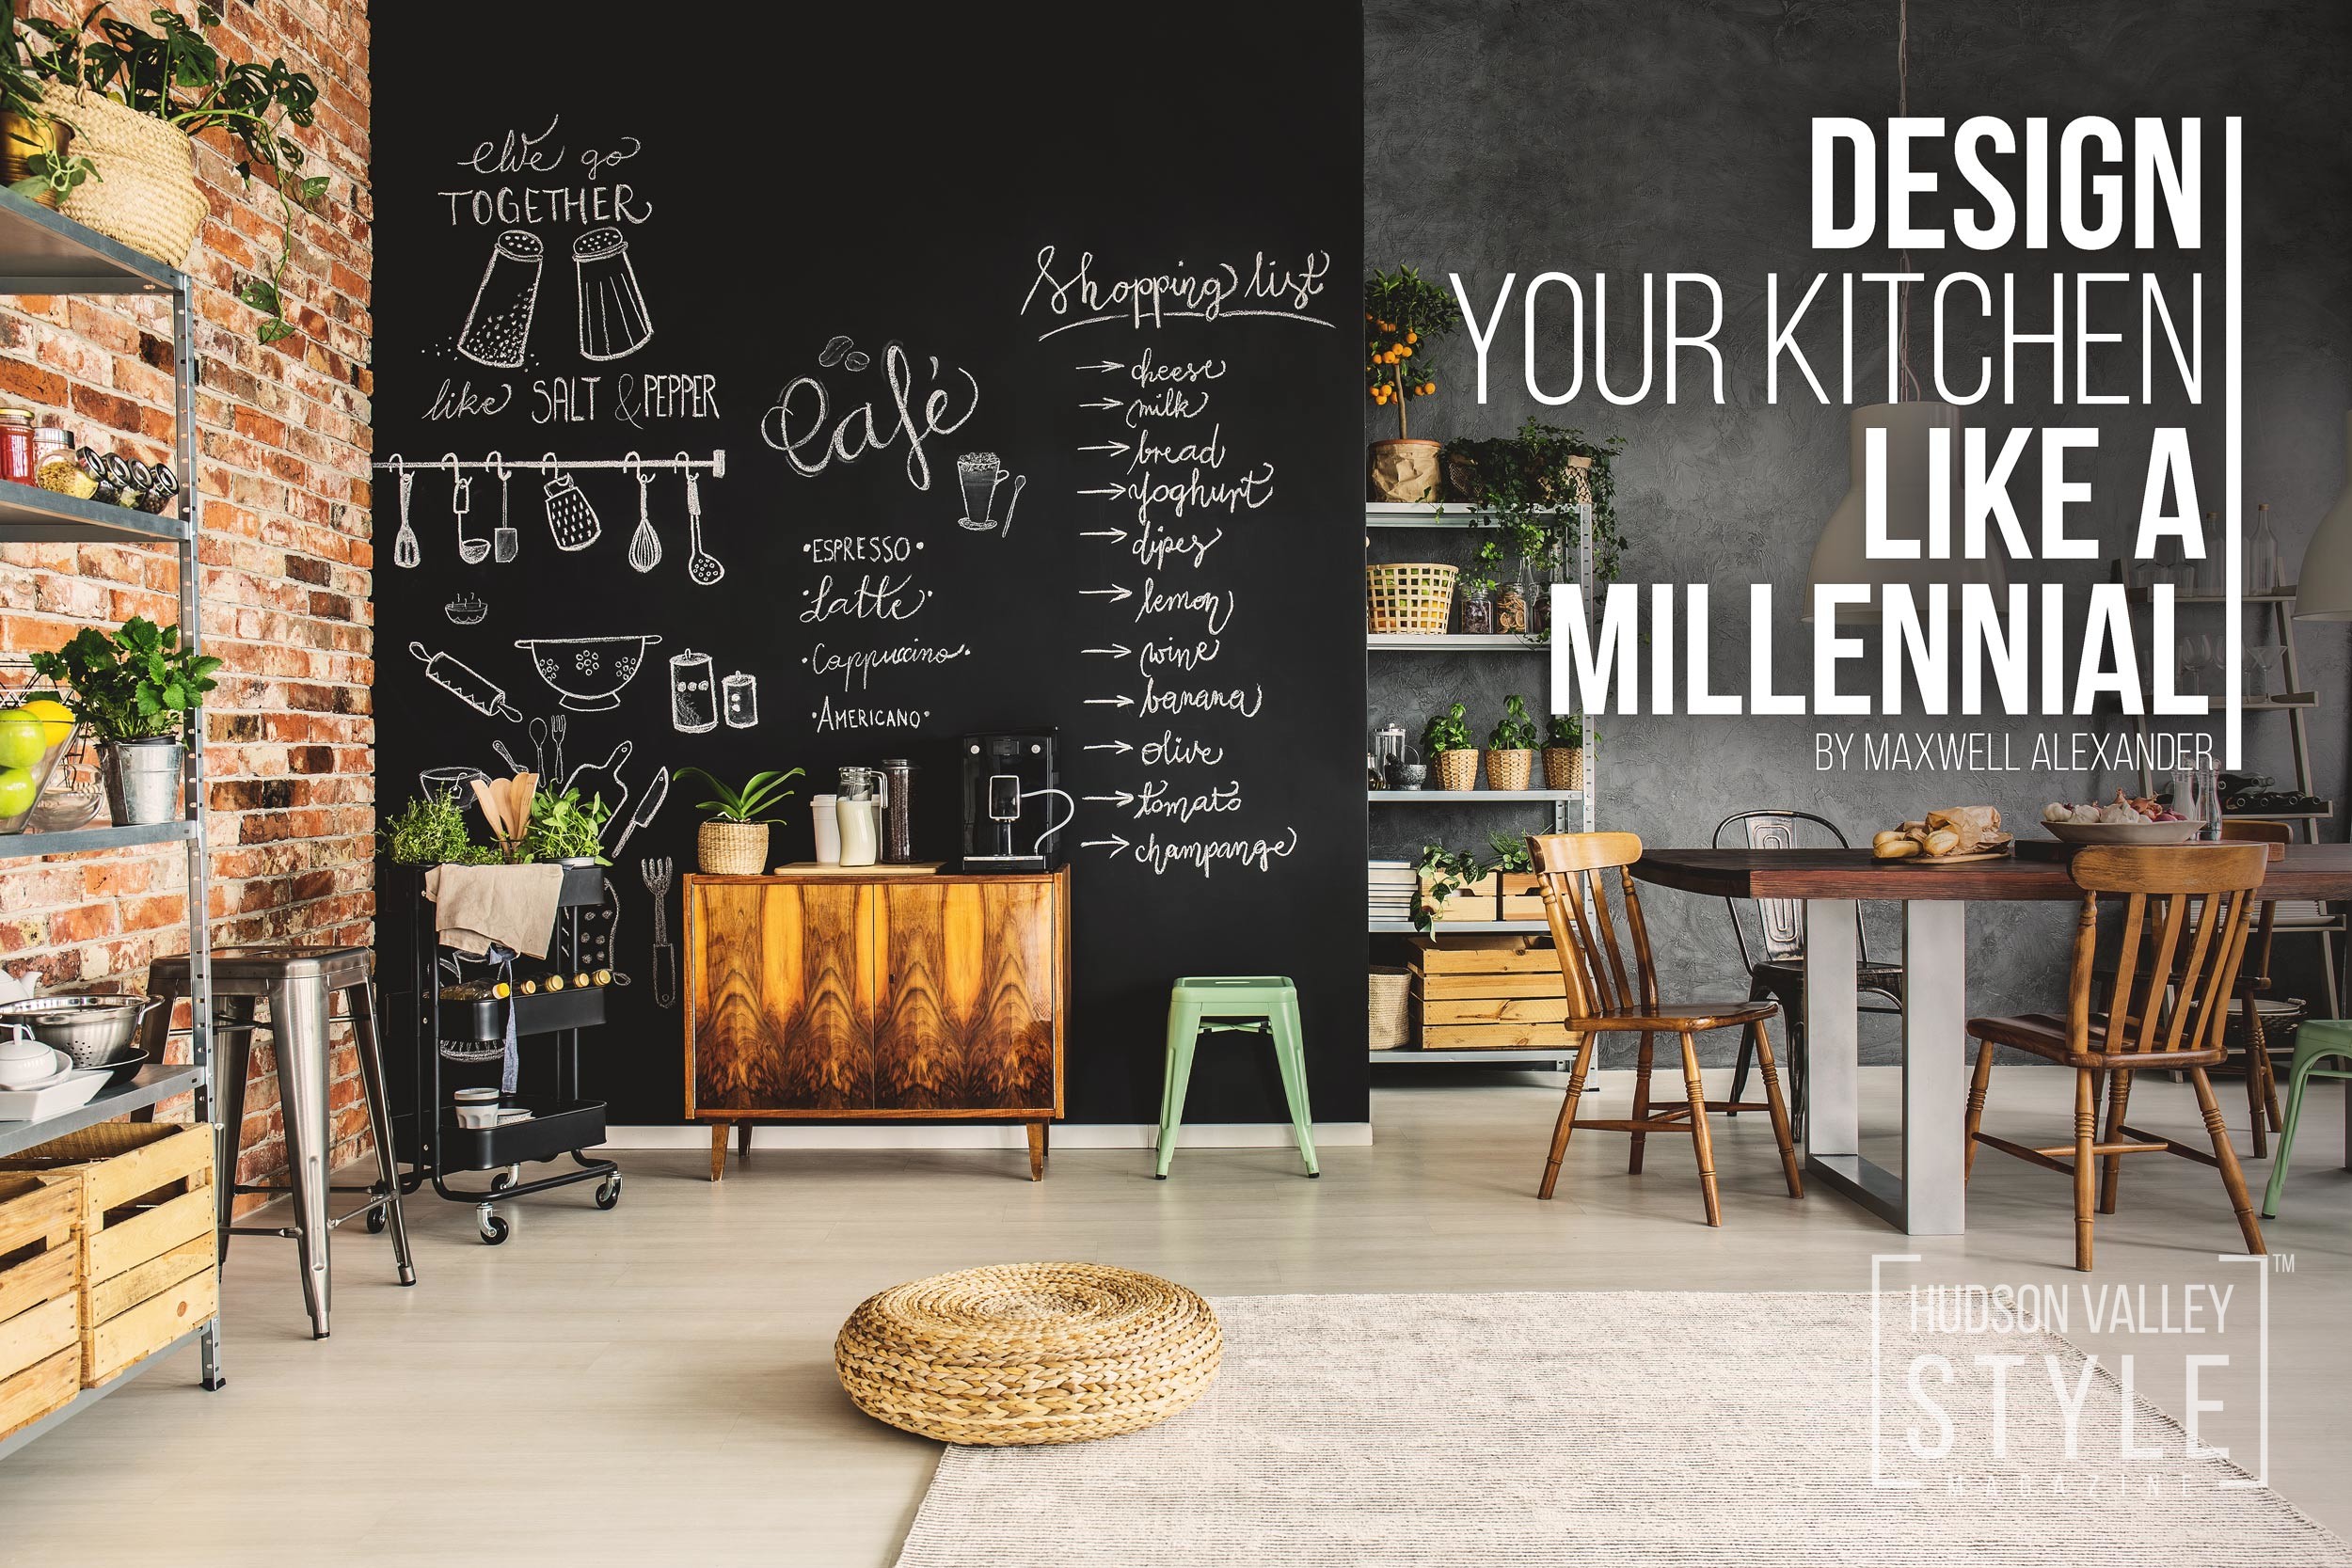 how to design your kitchen like a millennial - kitchen